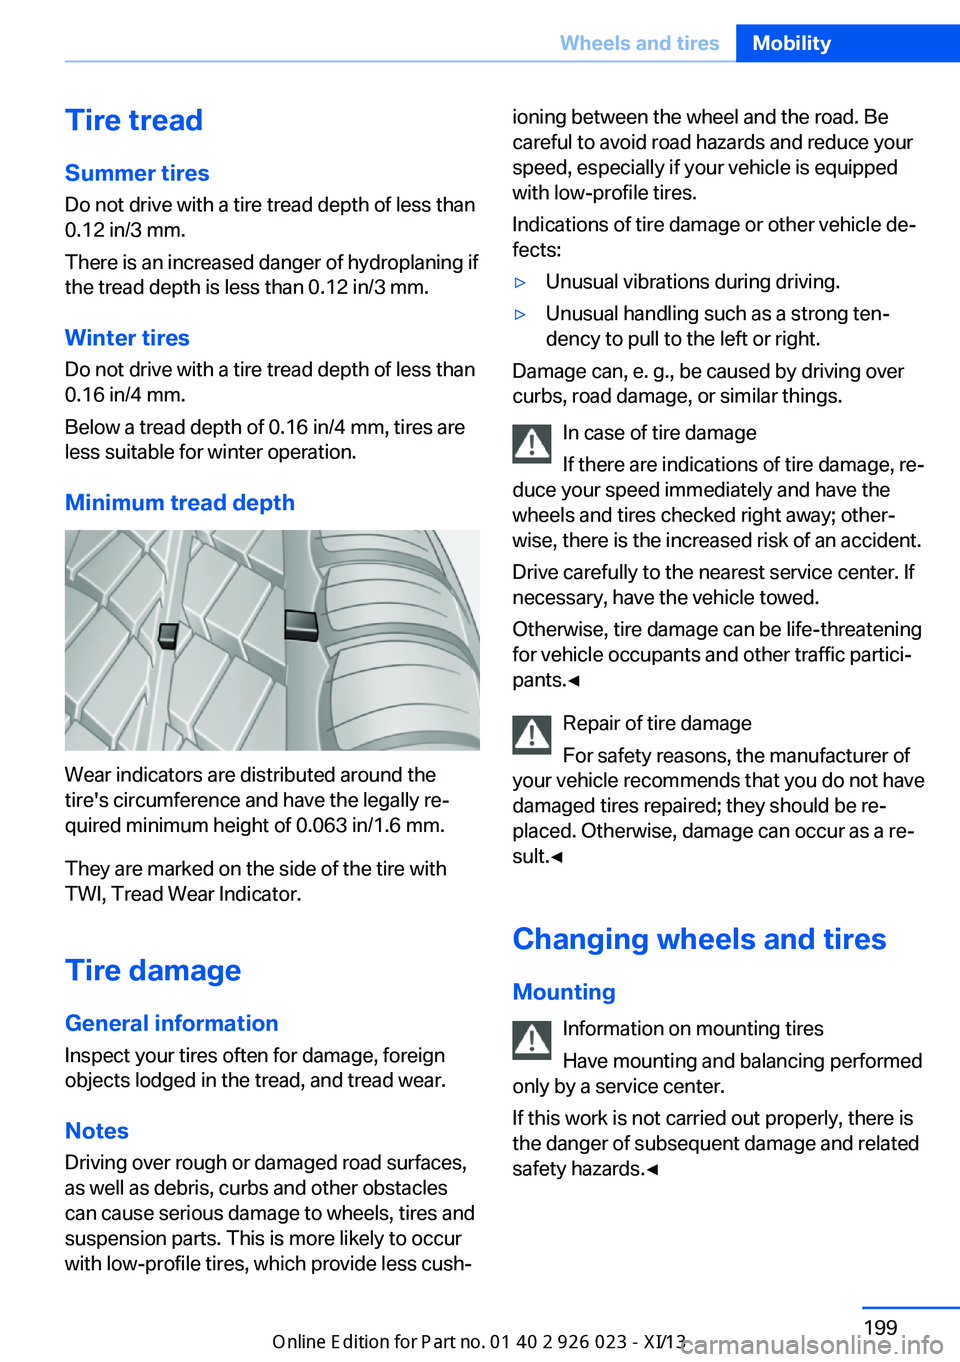 BMW 6 SERIES GRAN COUPE 2013 F12 Owners Manual Tire treadSummer tires
Do not drive with a tire tread depth of less than
0.12 in/3 mm.
There is an increased danger of hydroplaning if
the tread depth is less than 0.12 in/3 mm.
Winter tires Do not dr